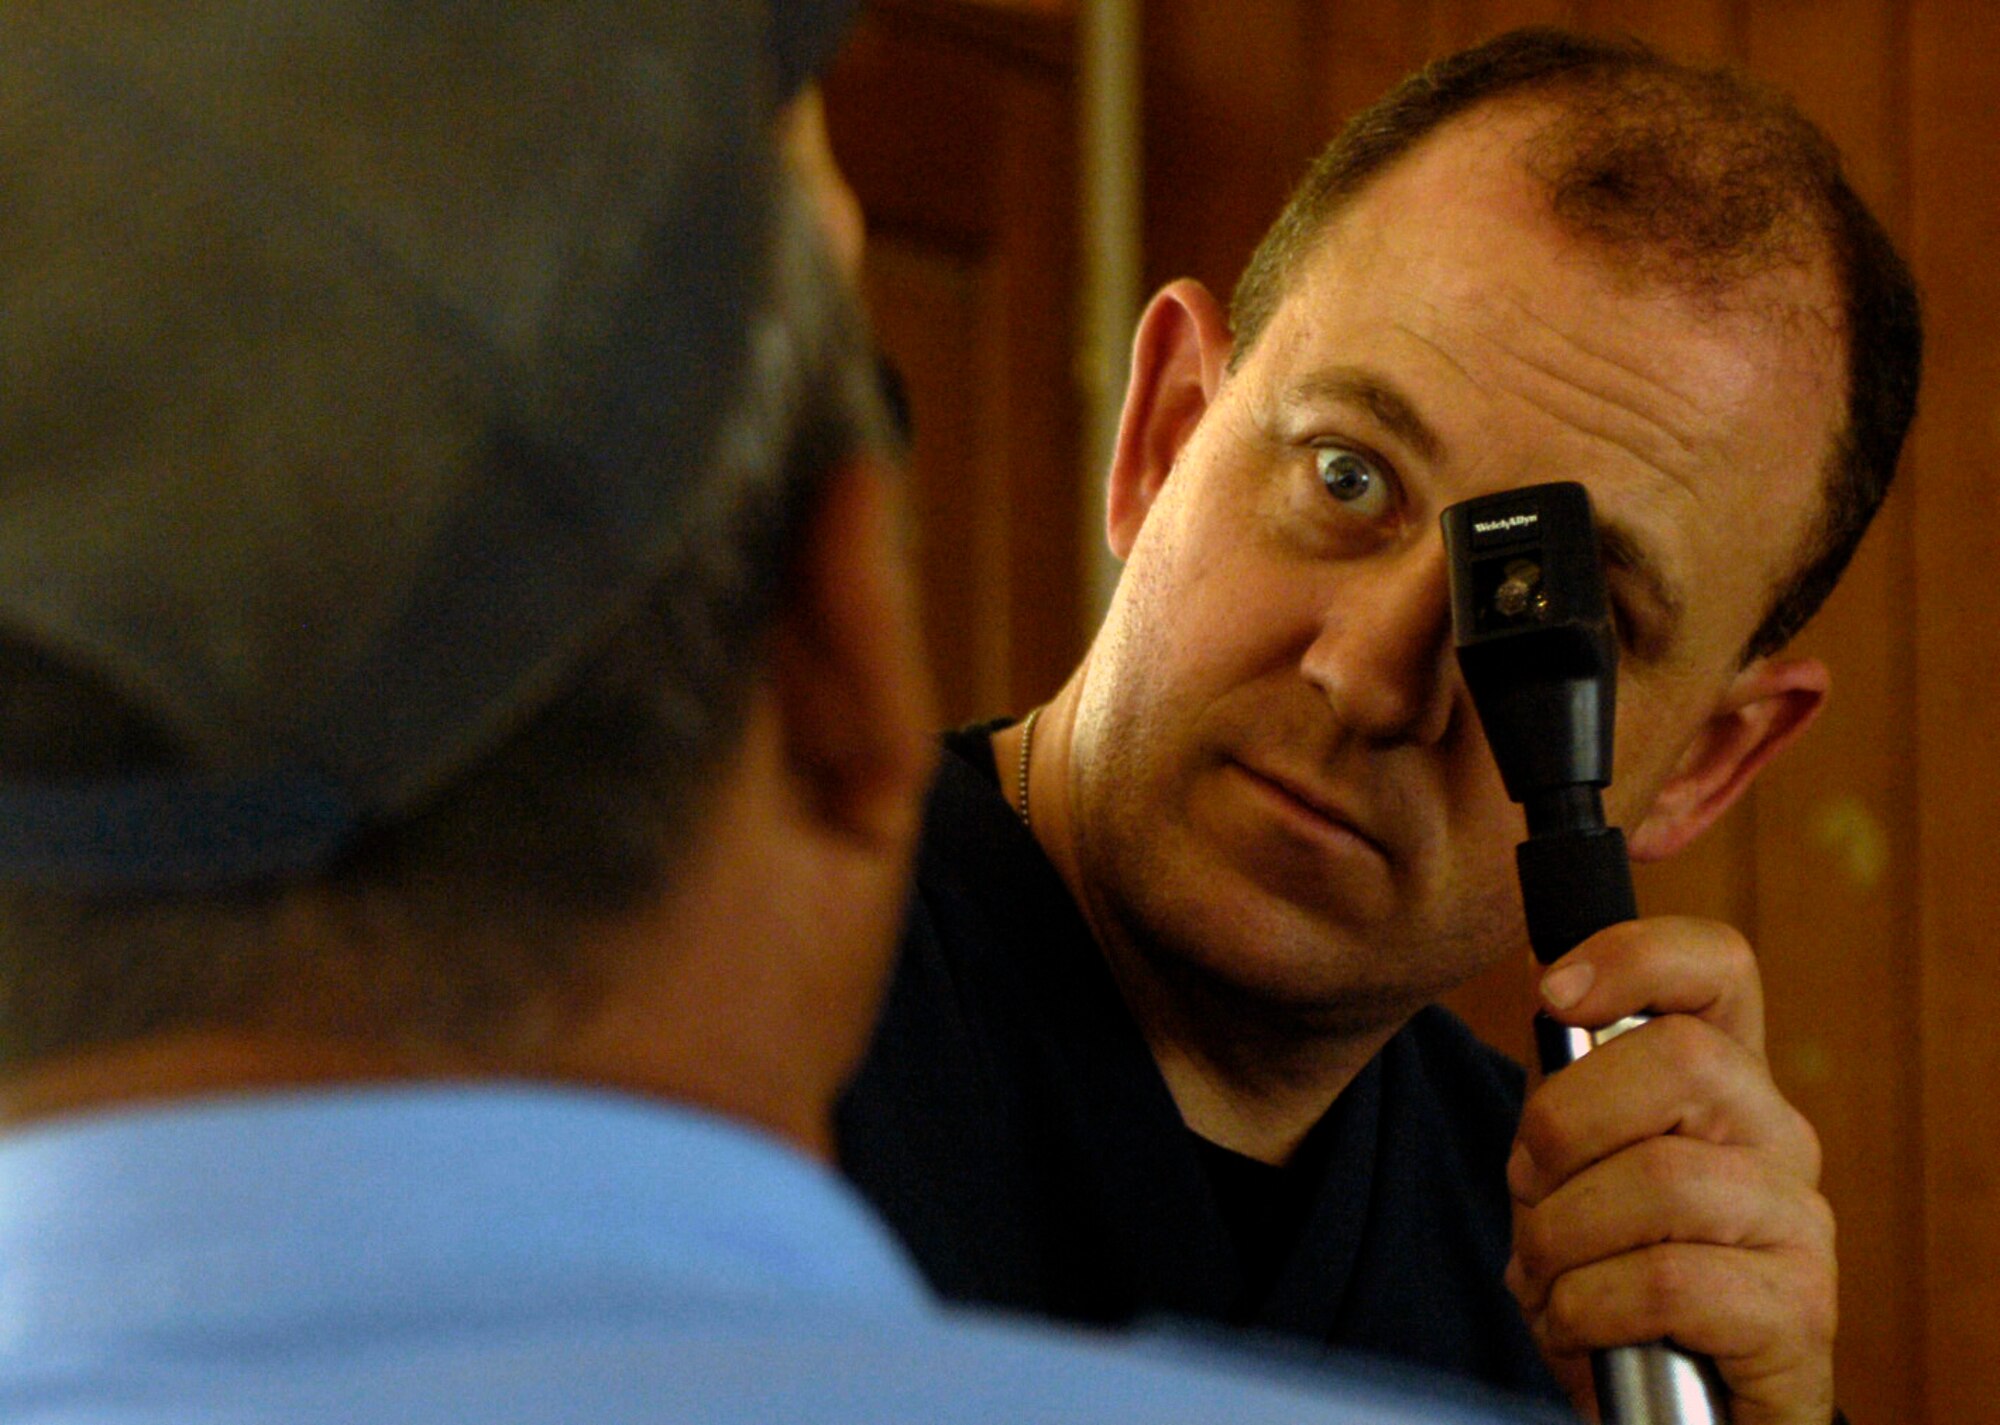 Lt. Col. John Blackburn examines a Nicaraguan volunteer policeman's eyes March 19 at a makeshift optometry clinic at Collegio San Gregorio. Inside the local school, 836 Nicaraguan patients were given free medical, dental and optometry care during a Medical Readiness Training Exercise as part of New Horizons-Nicaragua 2007. Colonel Blackburn is an optometrist with the California Air National Guard's 144th Medical Group. (U.S. Air Force photo/Staff Sgt. Jason T. Bailey)